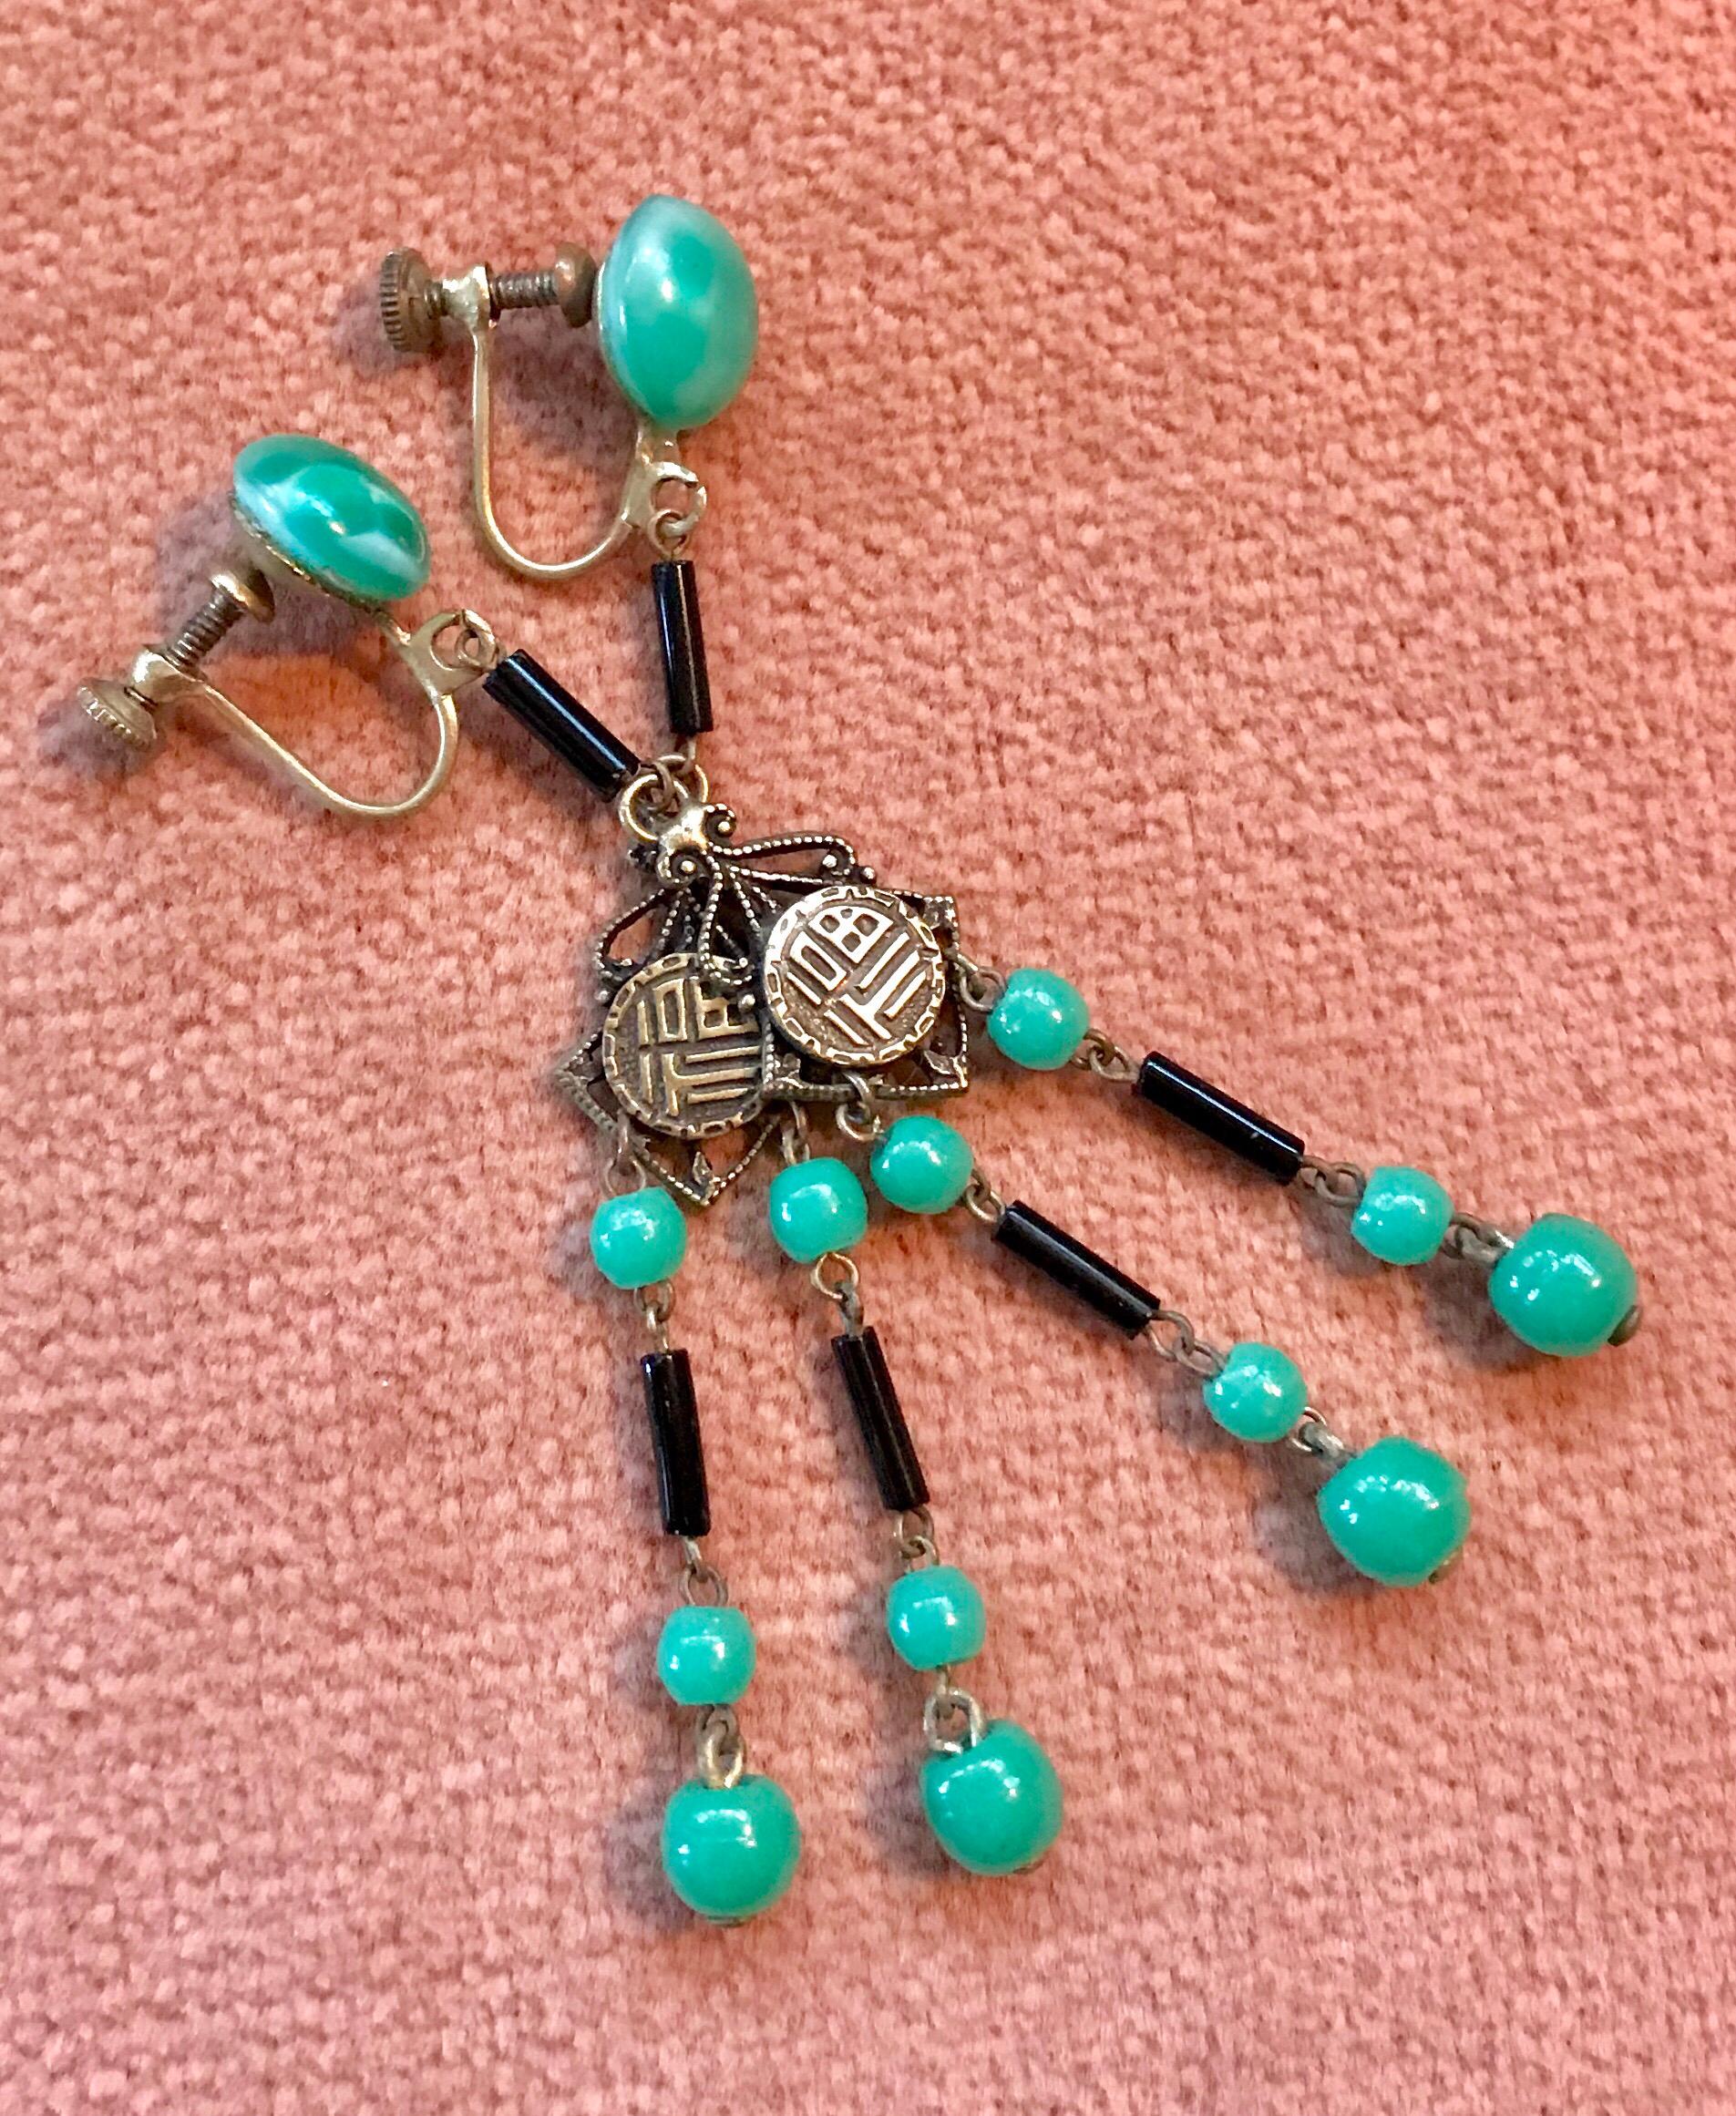 Circa 1920s Art Deco screw back, dangling earrings with a green glass cabochon top.  They are embellished with brass decorative plaques, green round beads and black glass tube beads.  Each earring measures 2.7